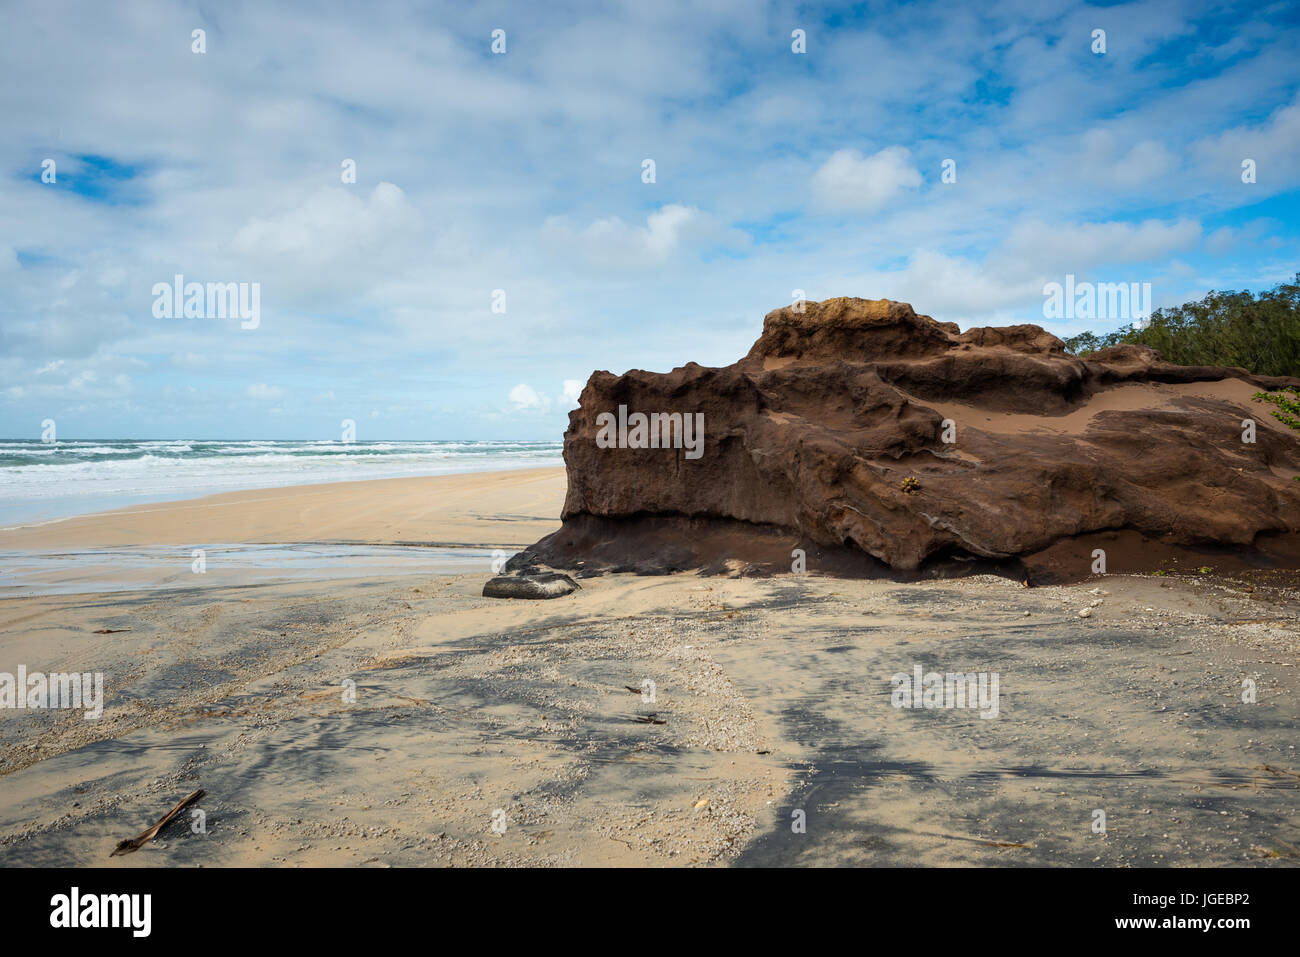 Coffee rocks made of sand on the beach at Fraser Island, Queensland, Australia. Stock Photo